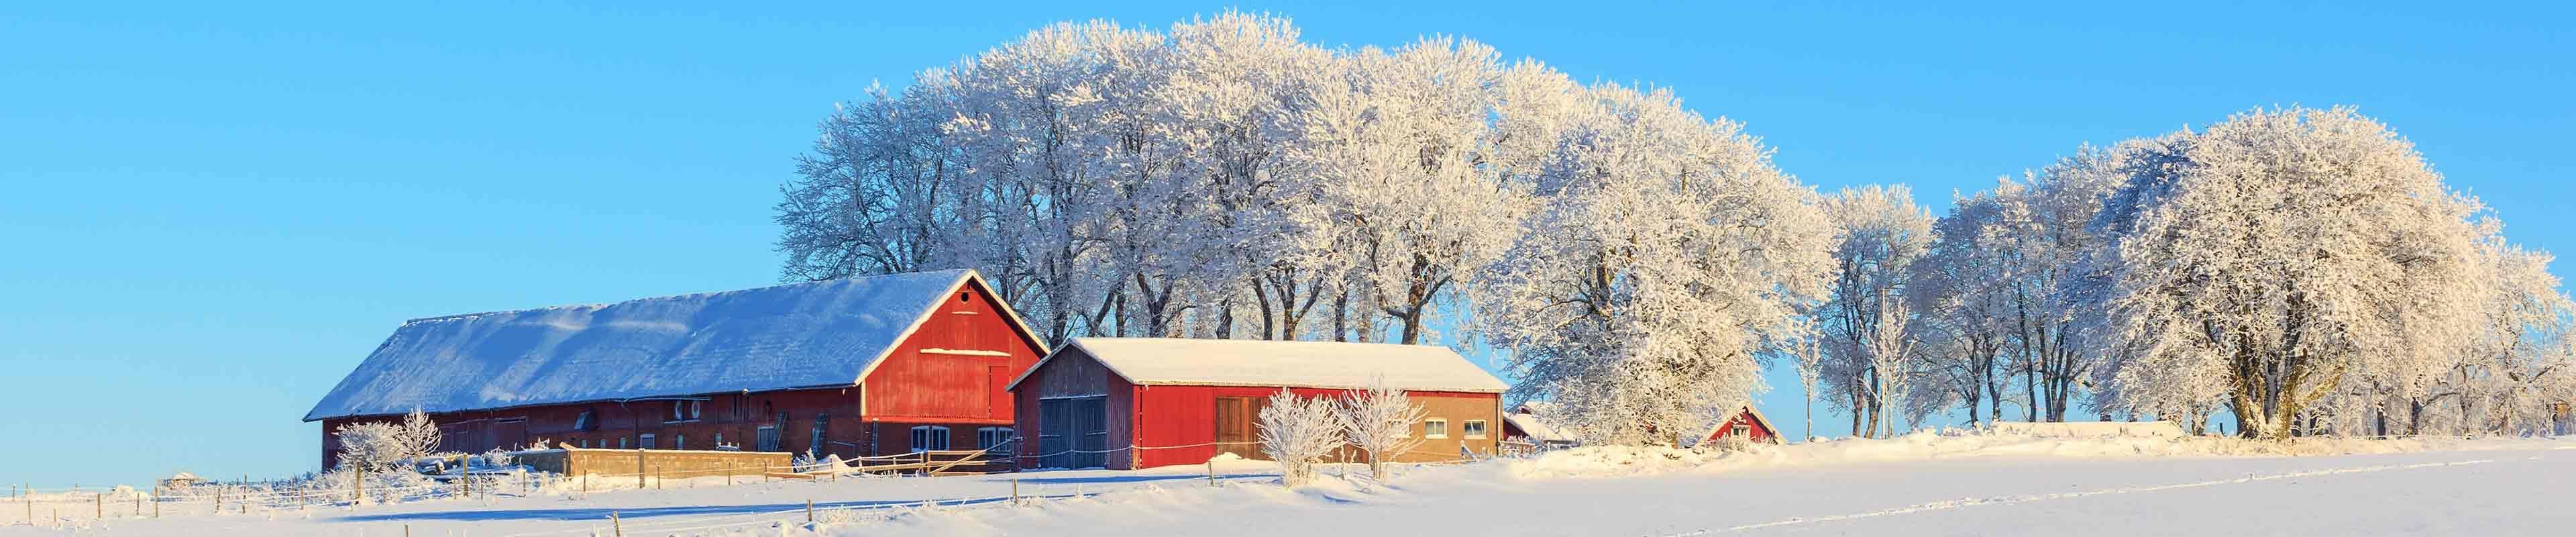 Image of a snow-covered pasture on a farm with barns, outbuildings and frost-covered trees.